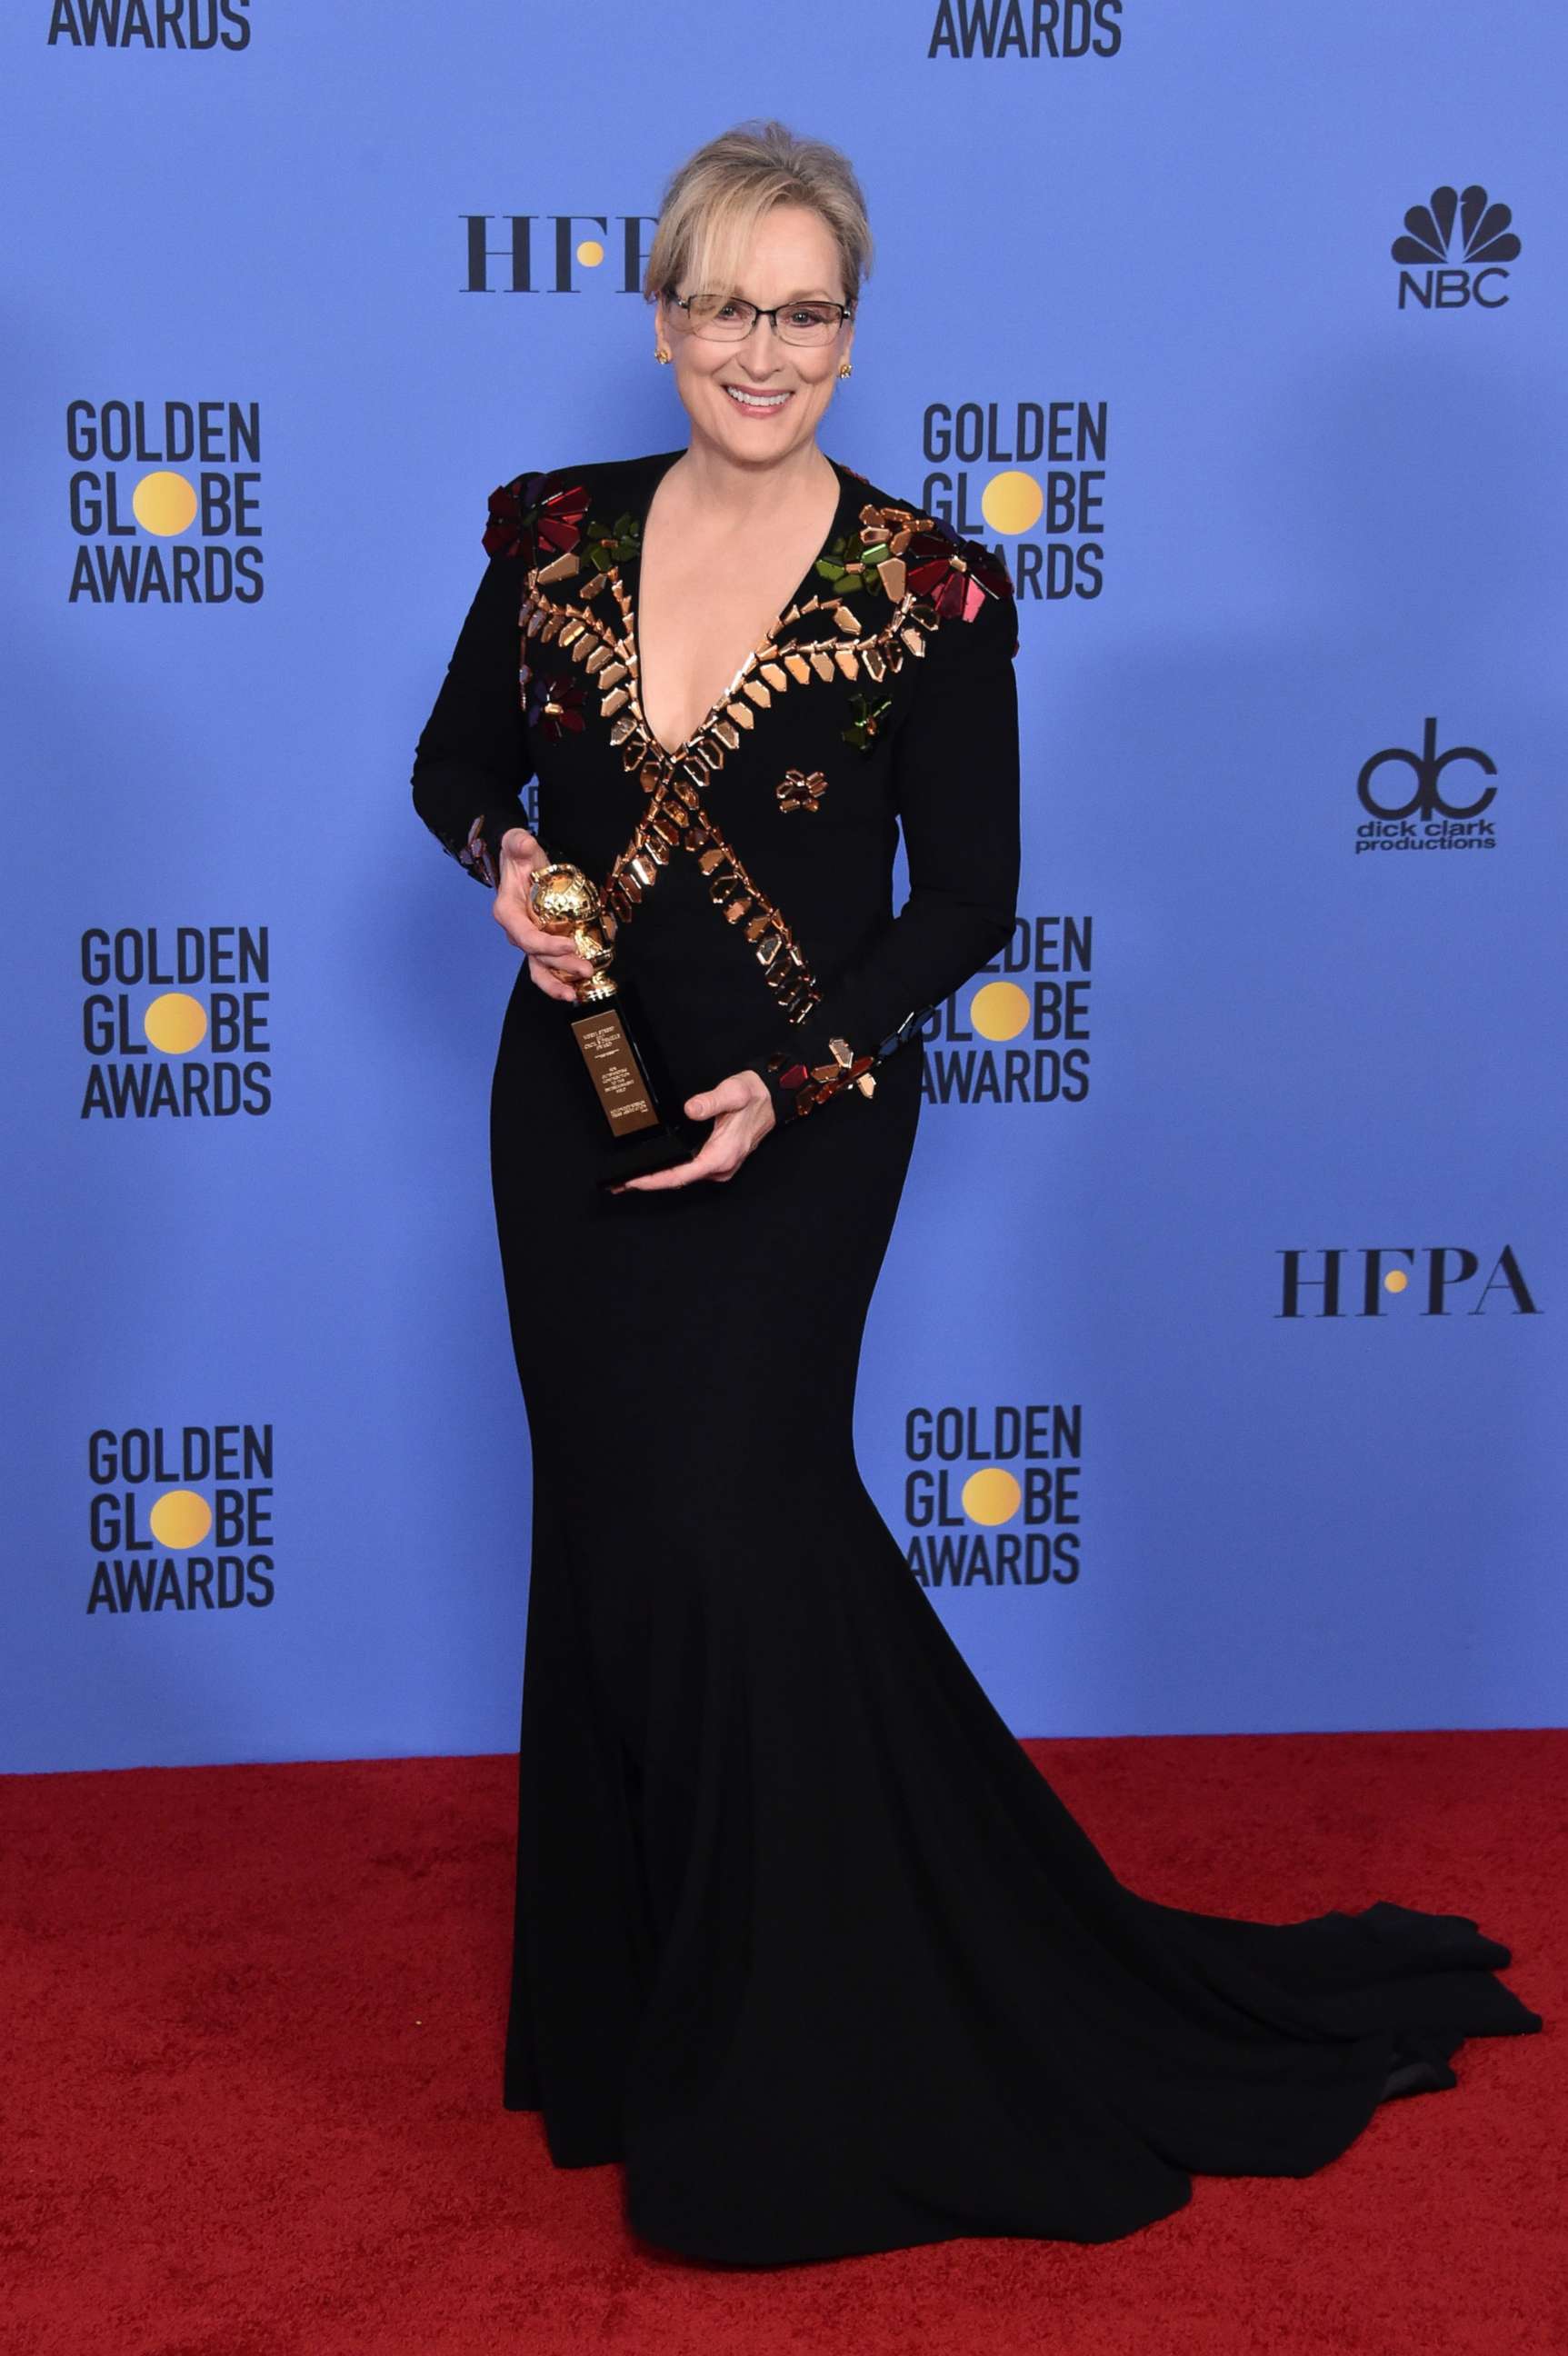 PHOTO: Meryl Streep poses in the press room during the 74th Annual Golden Globe Awards at The Beverly Hilton Hotel, Jan. 8, 2017, in Beverly Hills, Calif.  